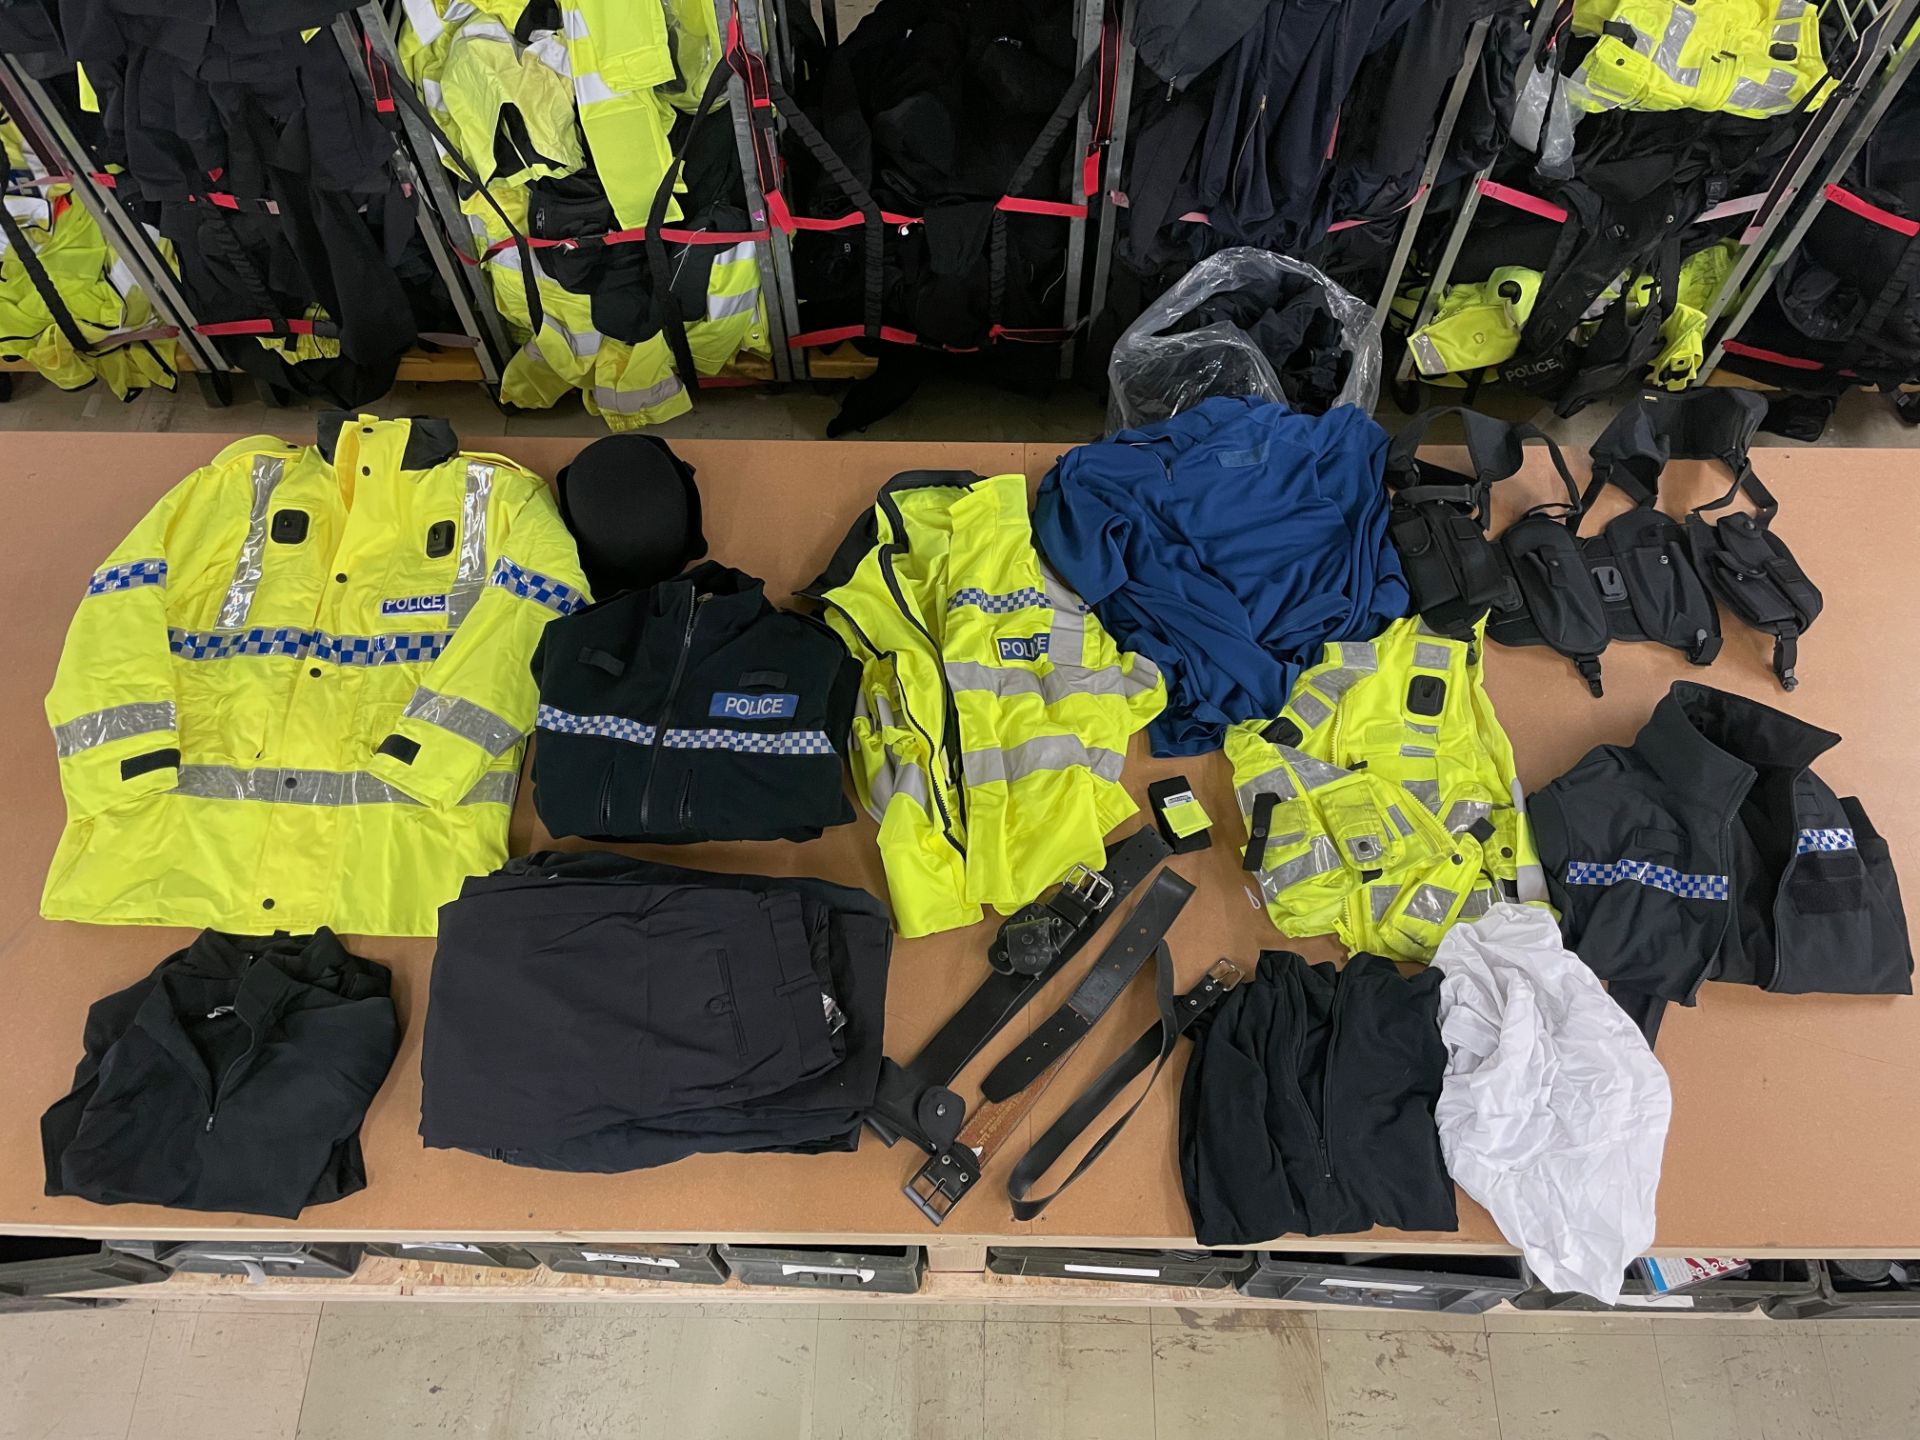 5 X BAGS STUFFED WITH EX POLICE UNIFORM CLOTHING & ACCESSORIES - RRP £1375.00 - NO VAT ON HAMMER - Image 11 of 12